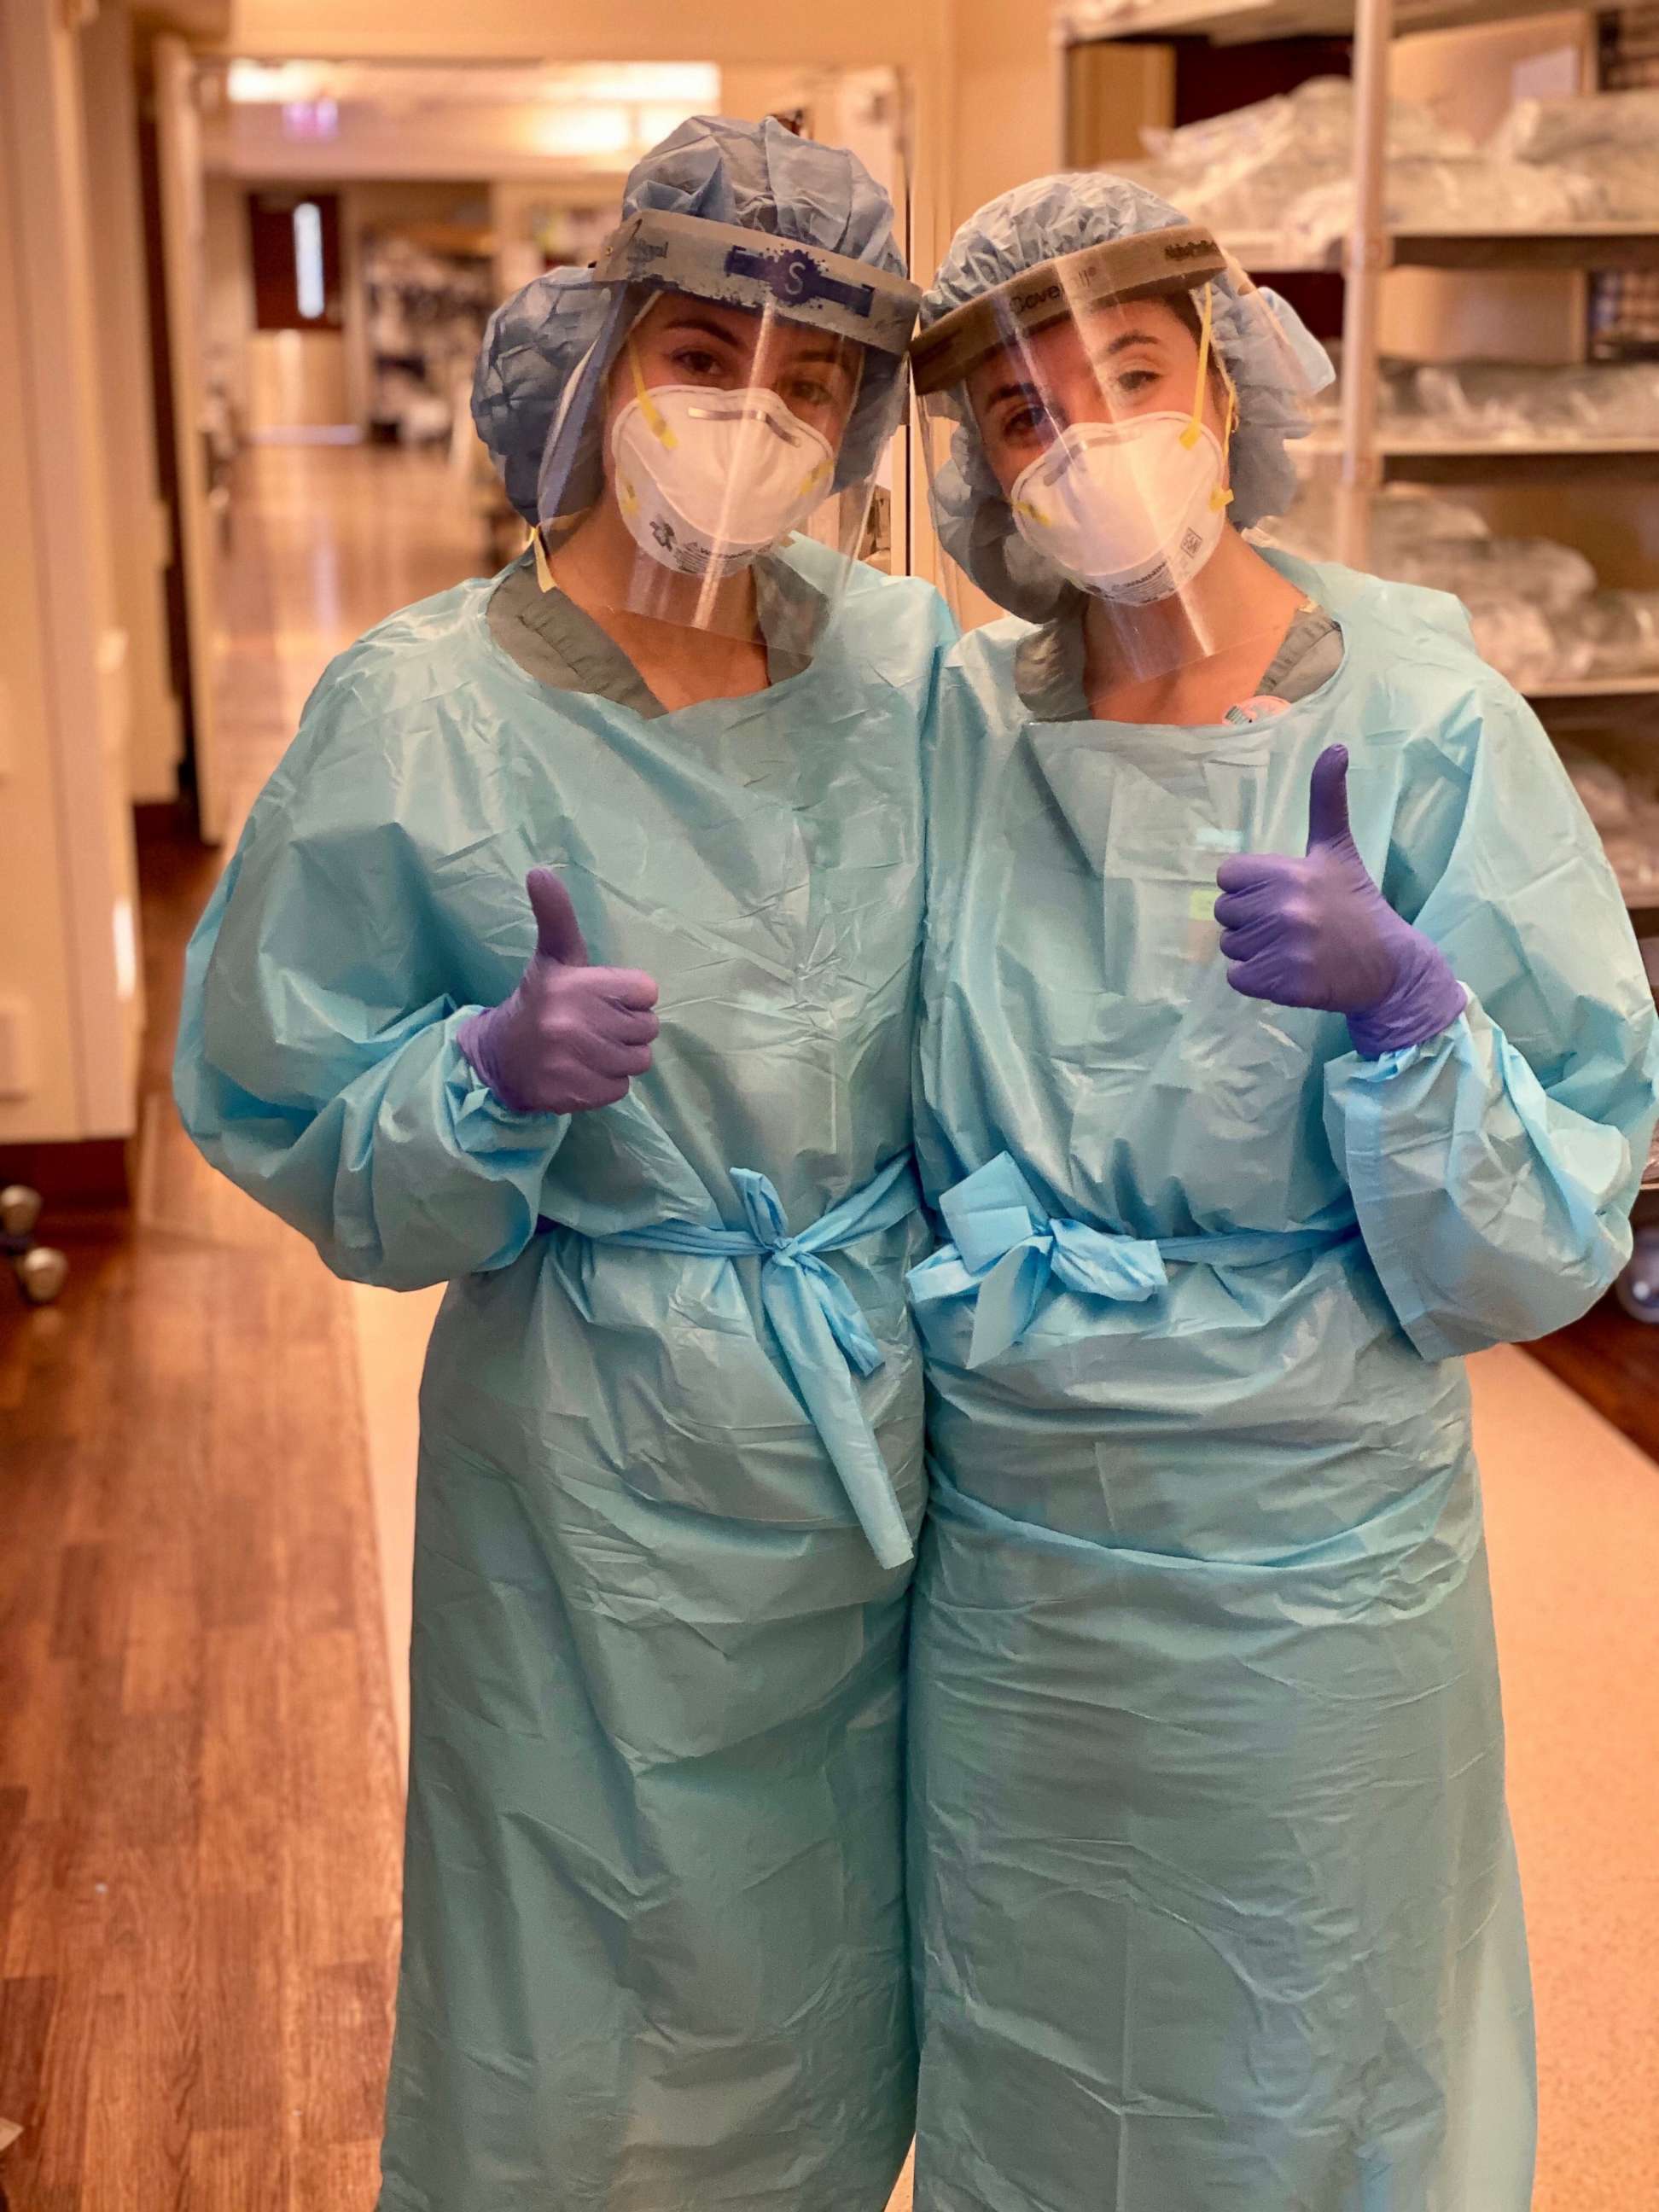 PHOTO: Samantha and Rebecca Silverman are identical twin sisters working together as nurses in the COVID-19 unit at Northwestern Medicine in Chicago.